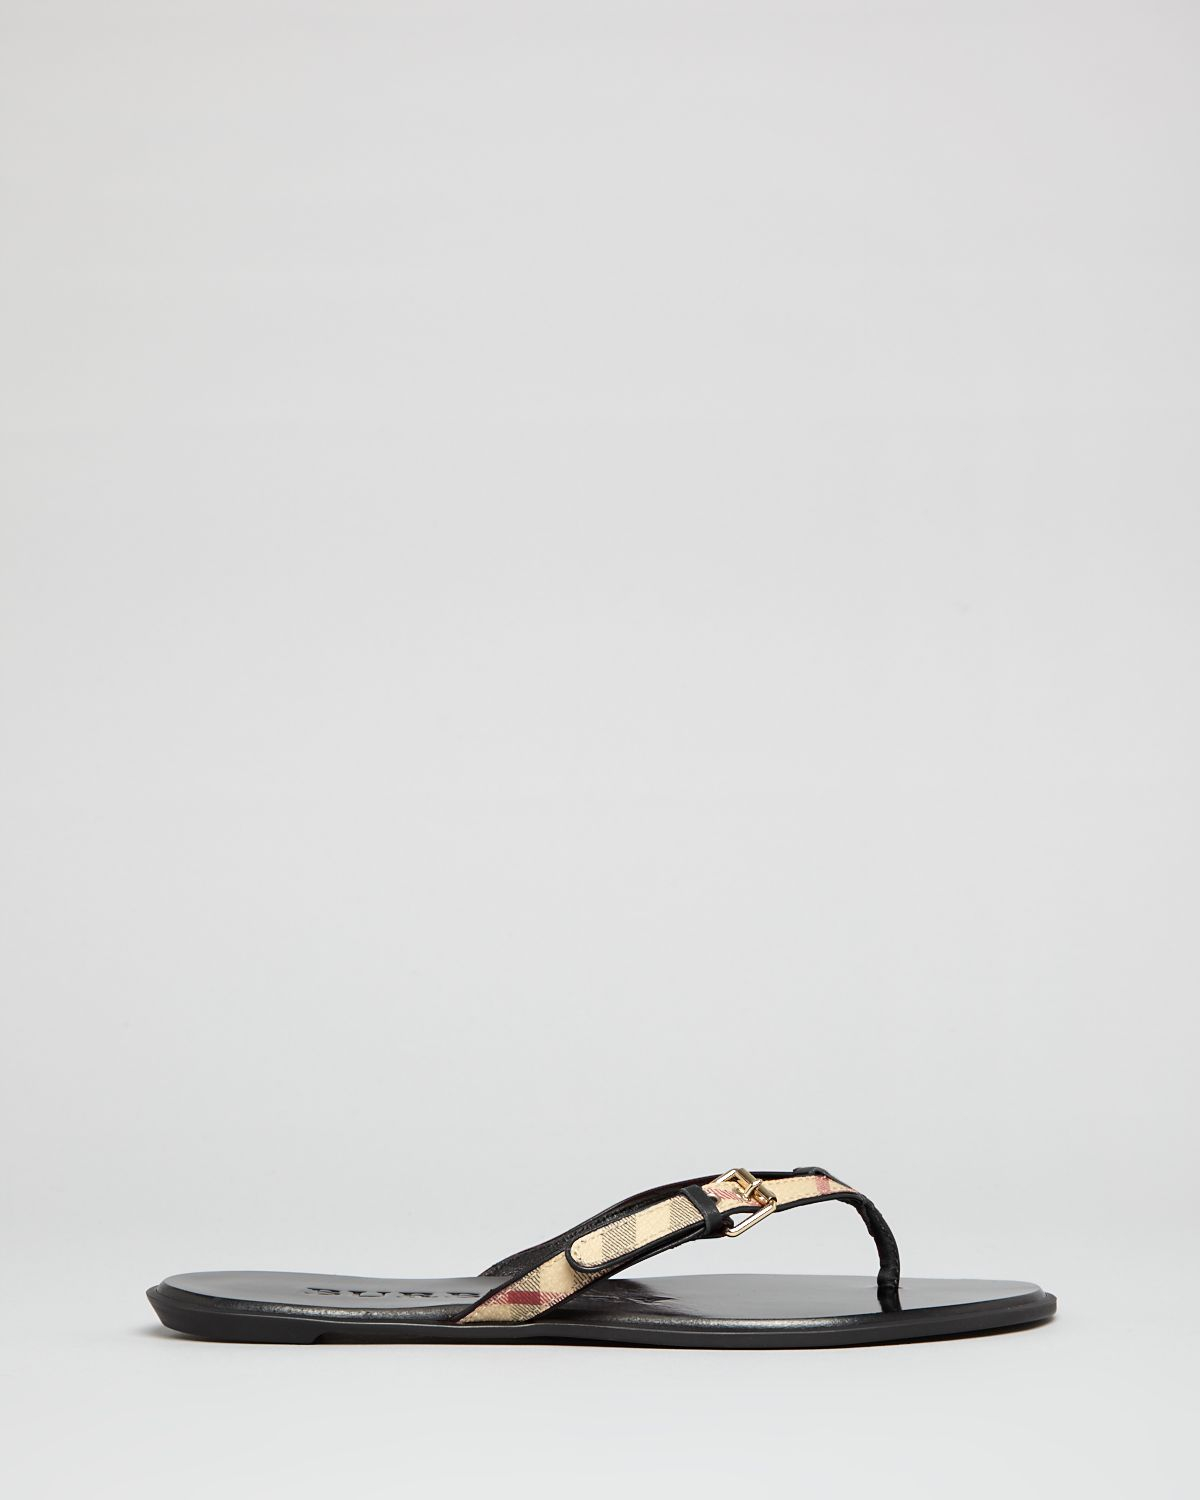 Stylish And Comfy: Burberry Flat Thong Sandals Gladstone - Shoe Effect